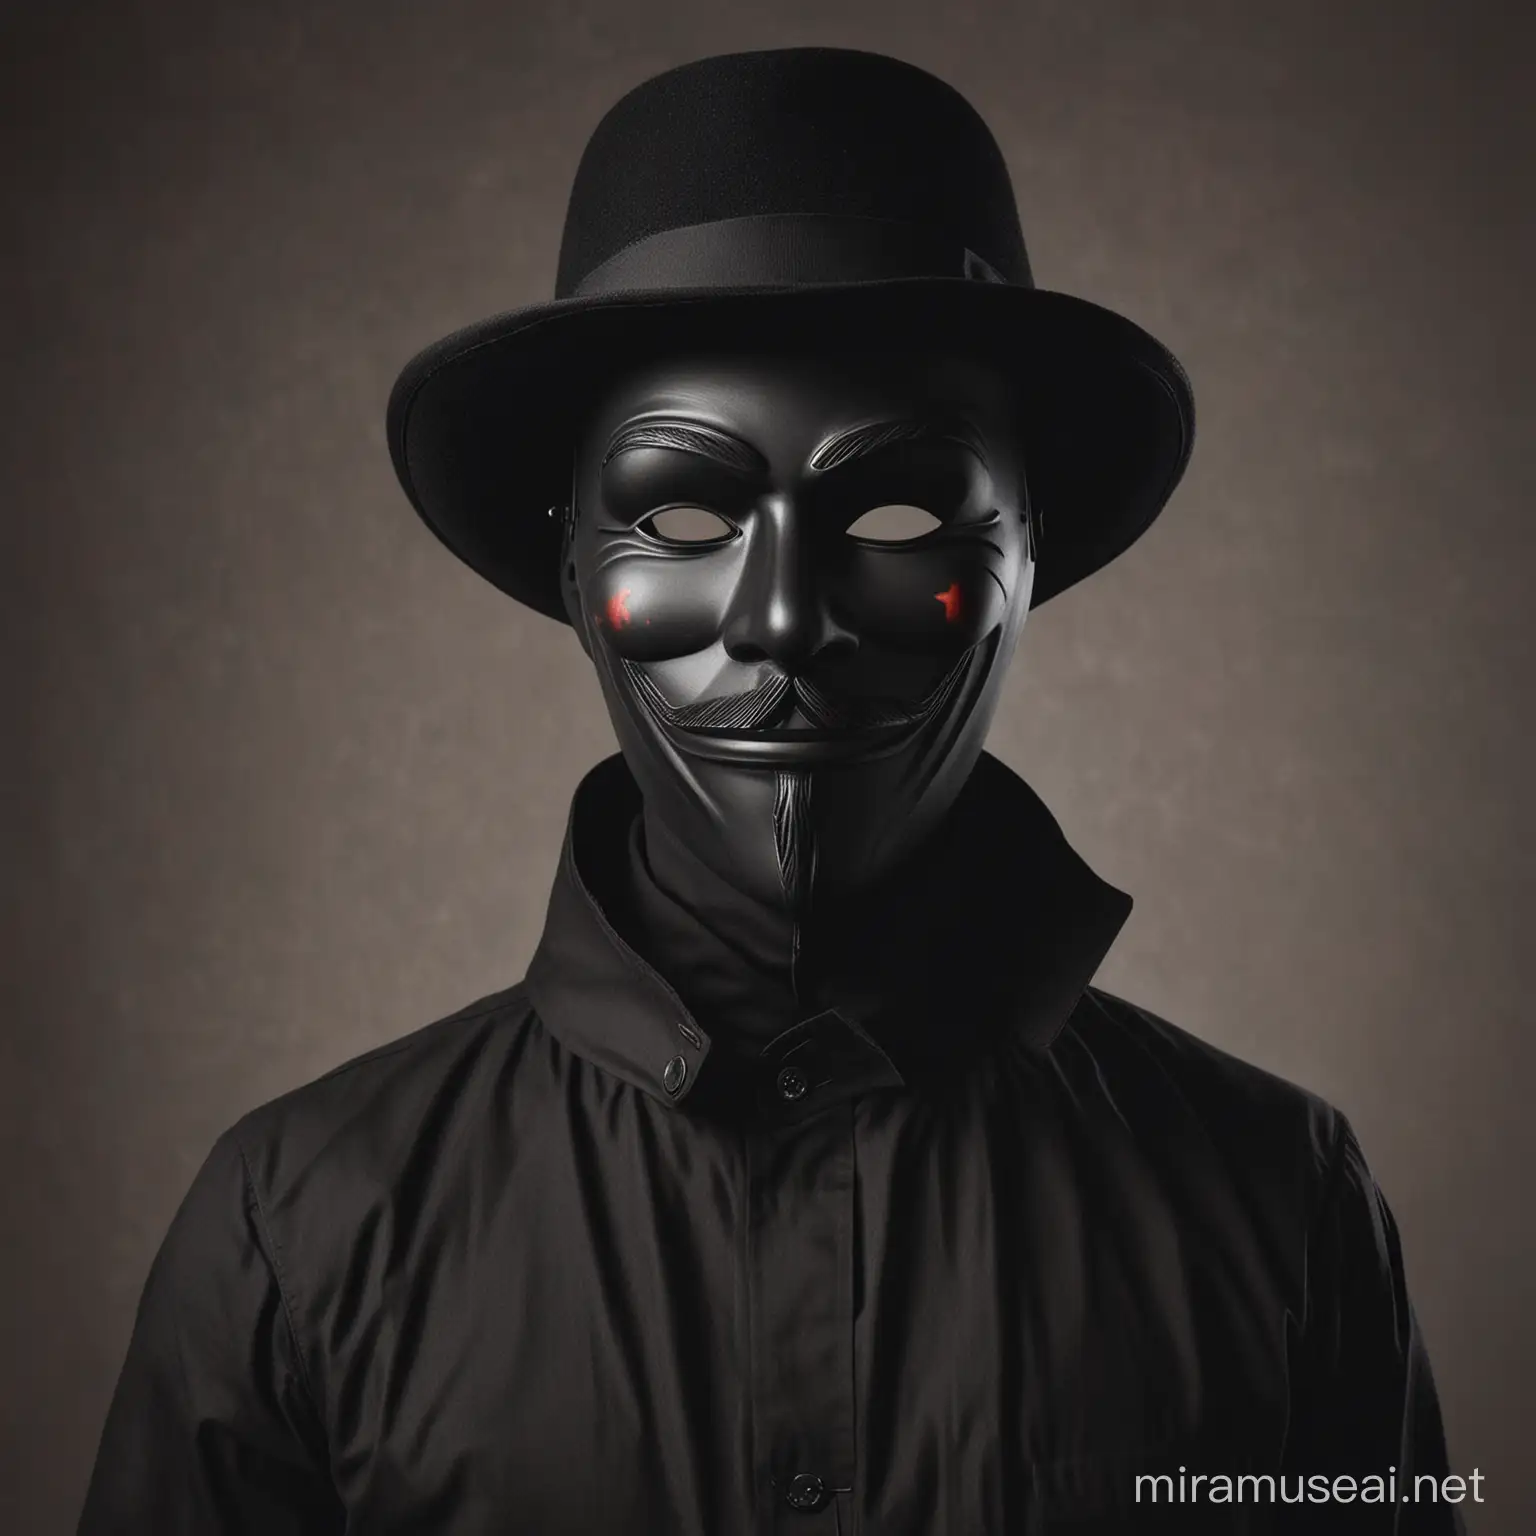 Guy Fawkes Mask on Black Mannequin Fashionable and Edgy Display